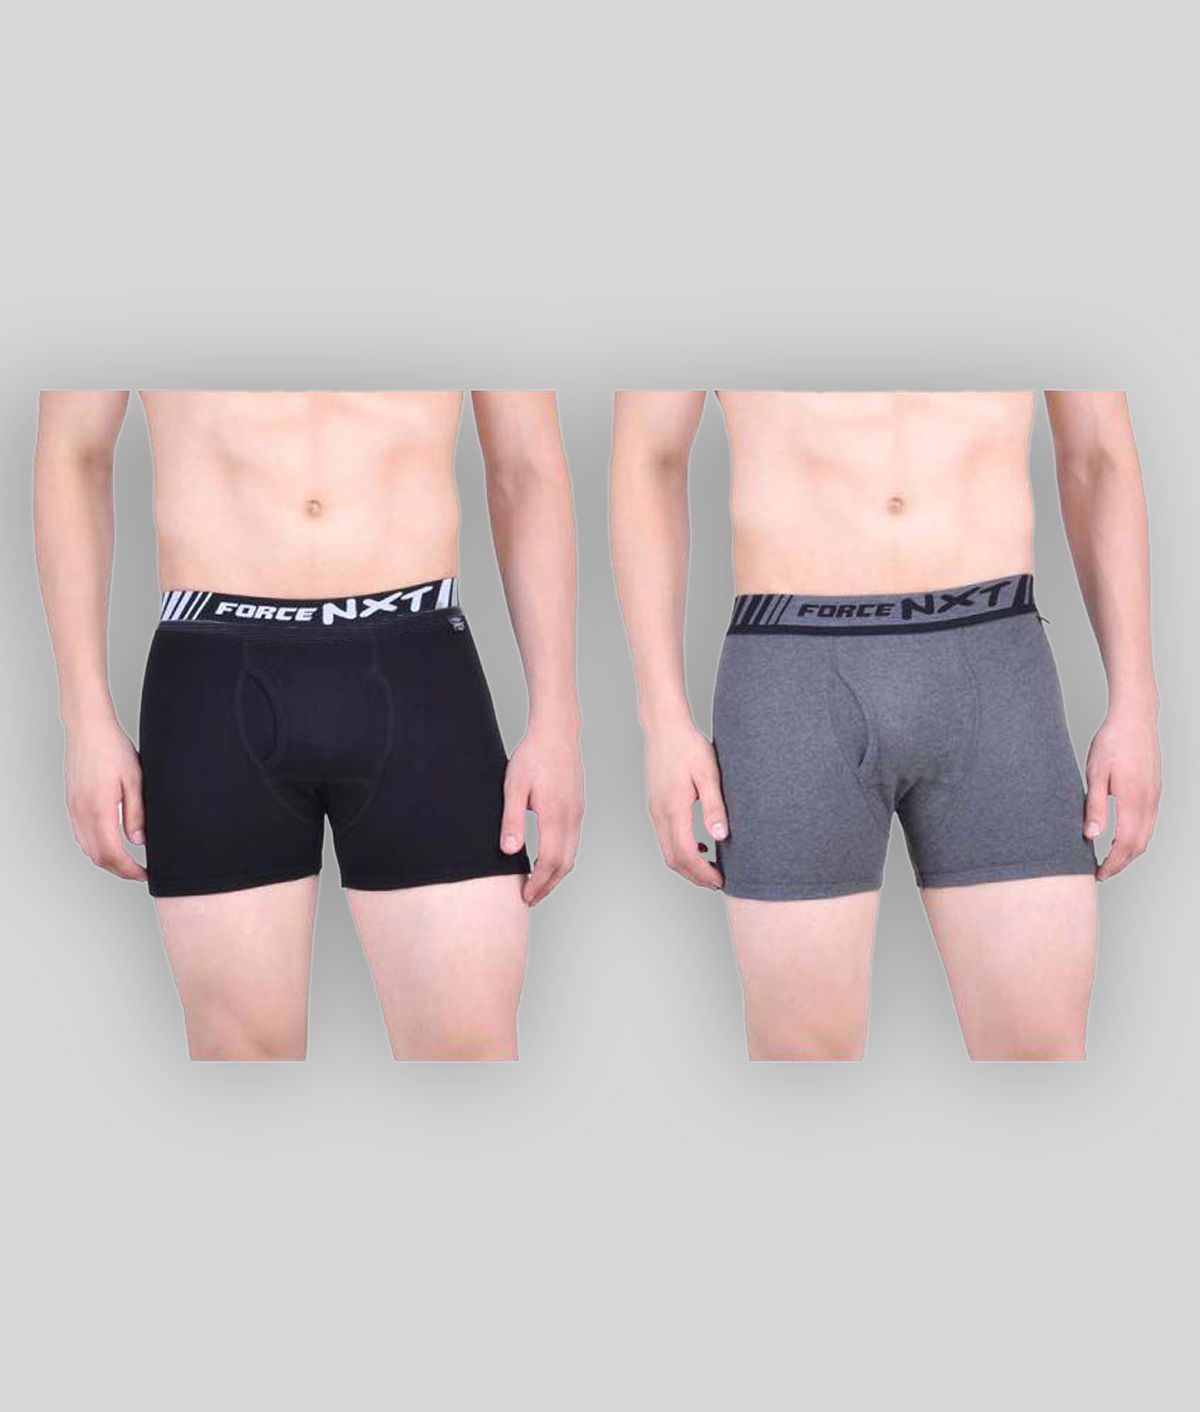     			Force NXT -  Black 100% Cotton Men's Trunks ( Pack of 2 )